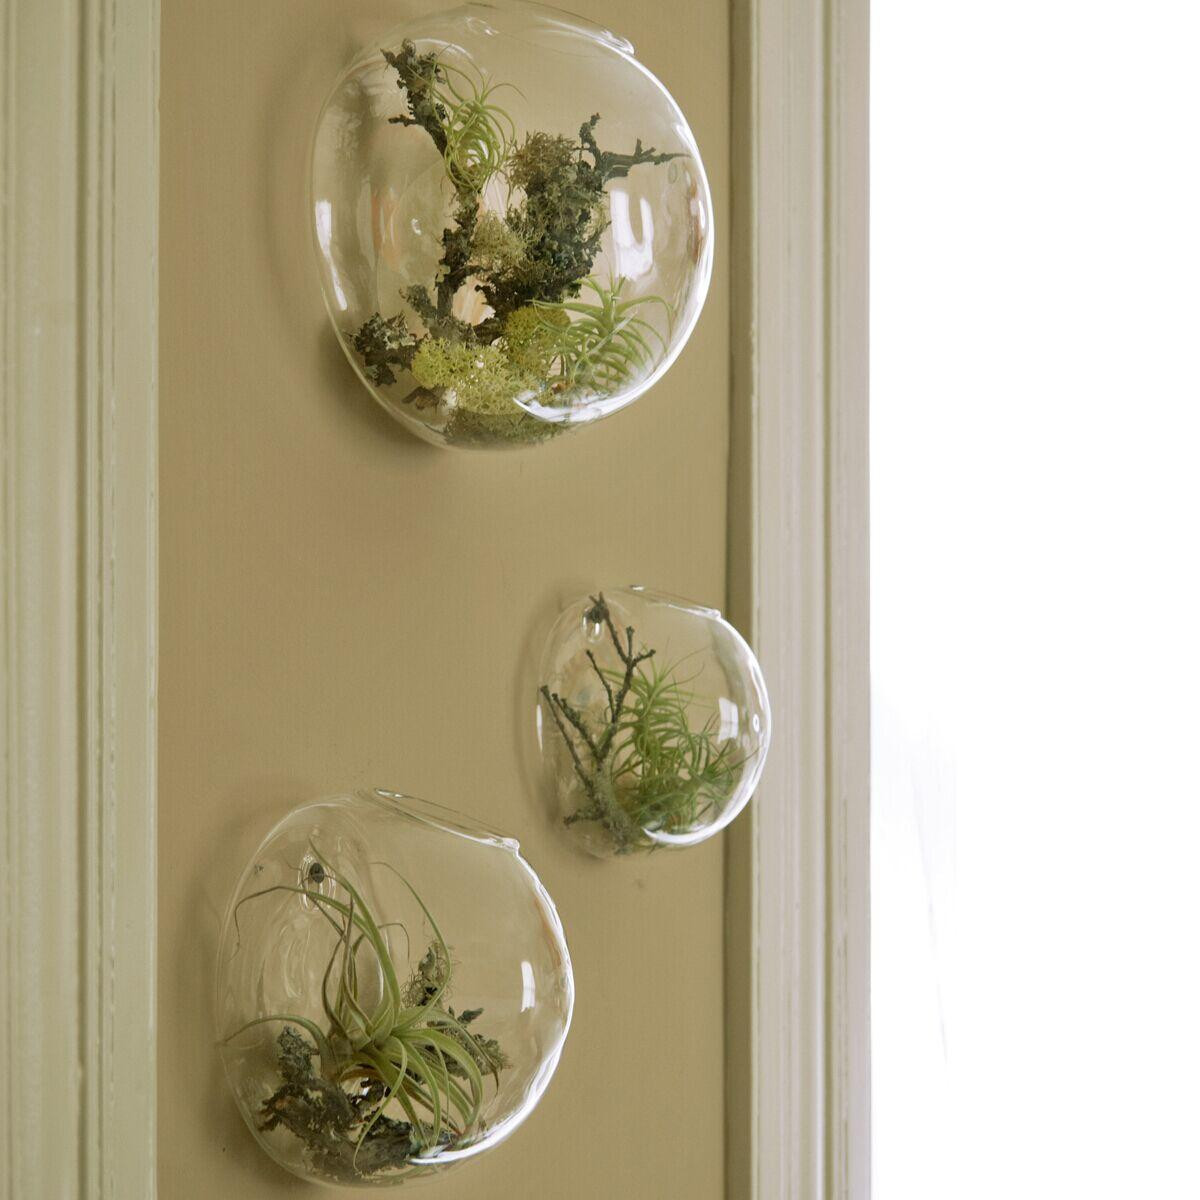 16 Fashionable Glass Vase with Bubbles 2022 free download glass vase with bubbles of wall bubble terrariums glass wall vase for flowers indoor plants inside wall bubble terrariums glass wall vase for flowers indoor plants wall mounted planter for s